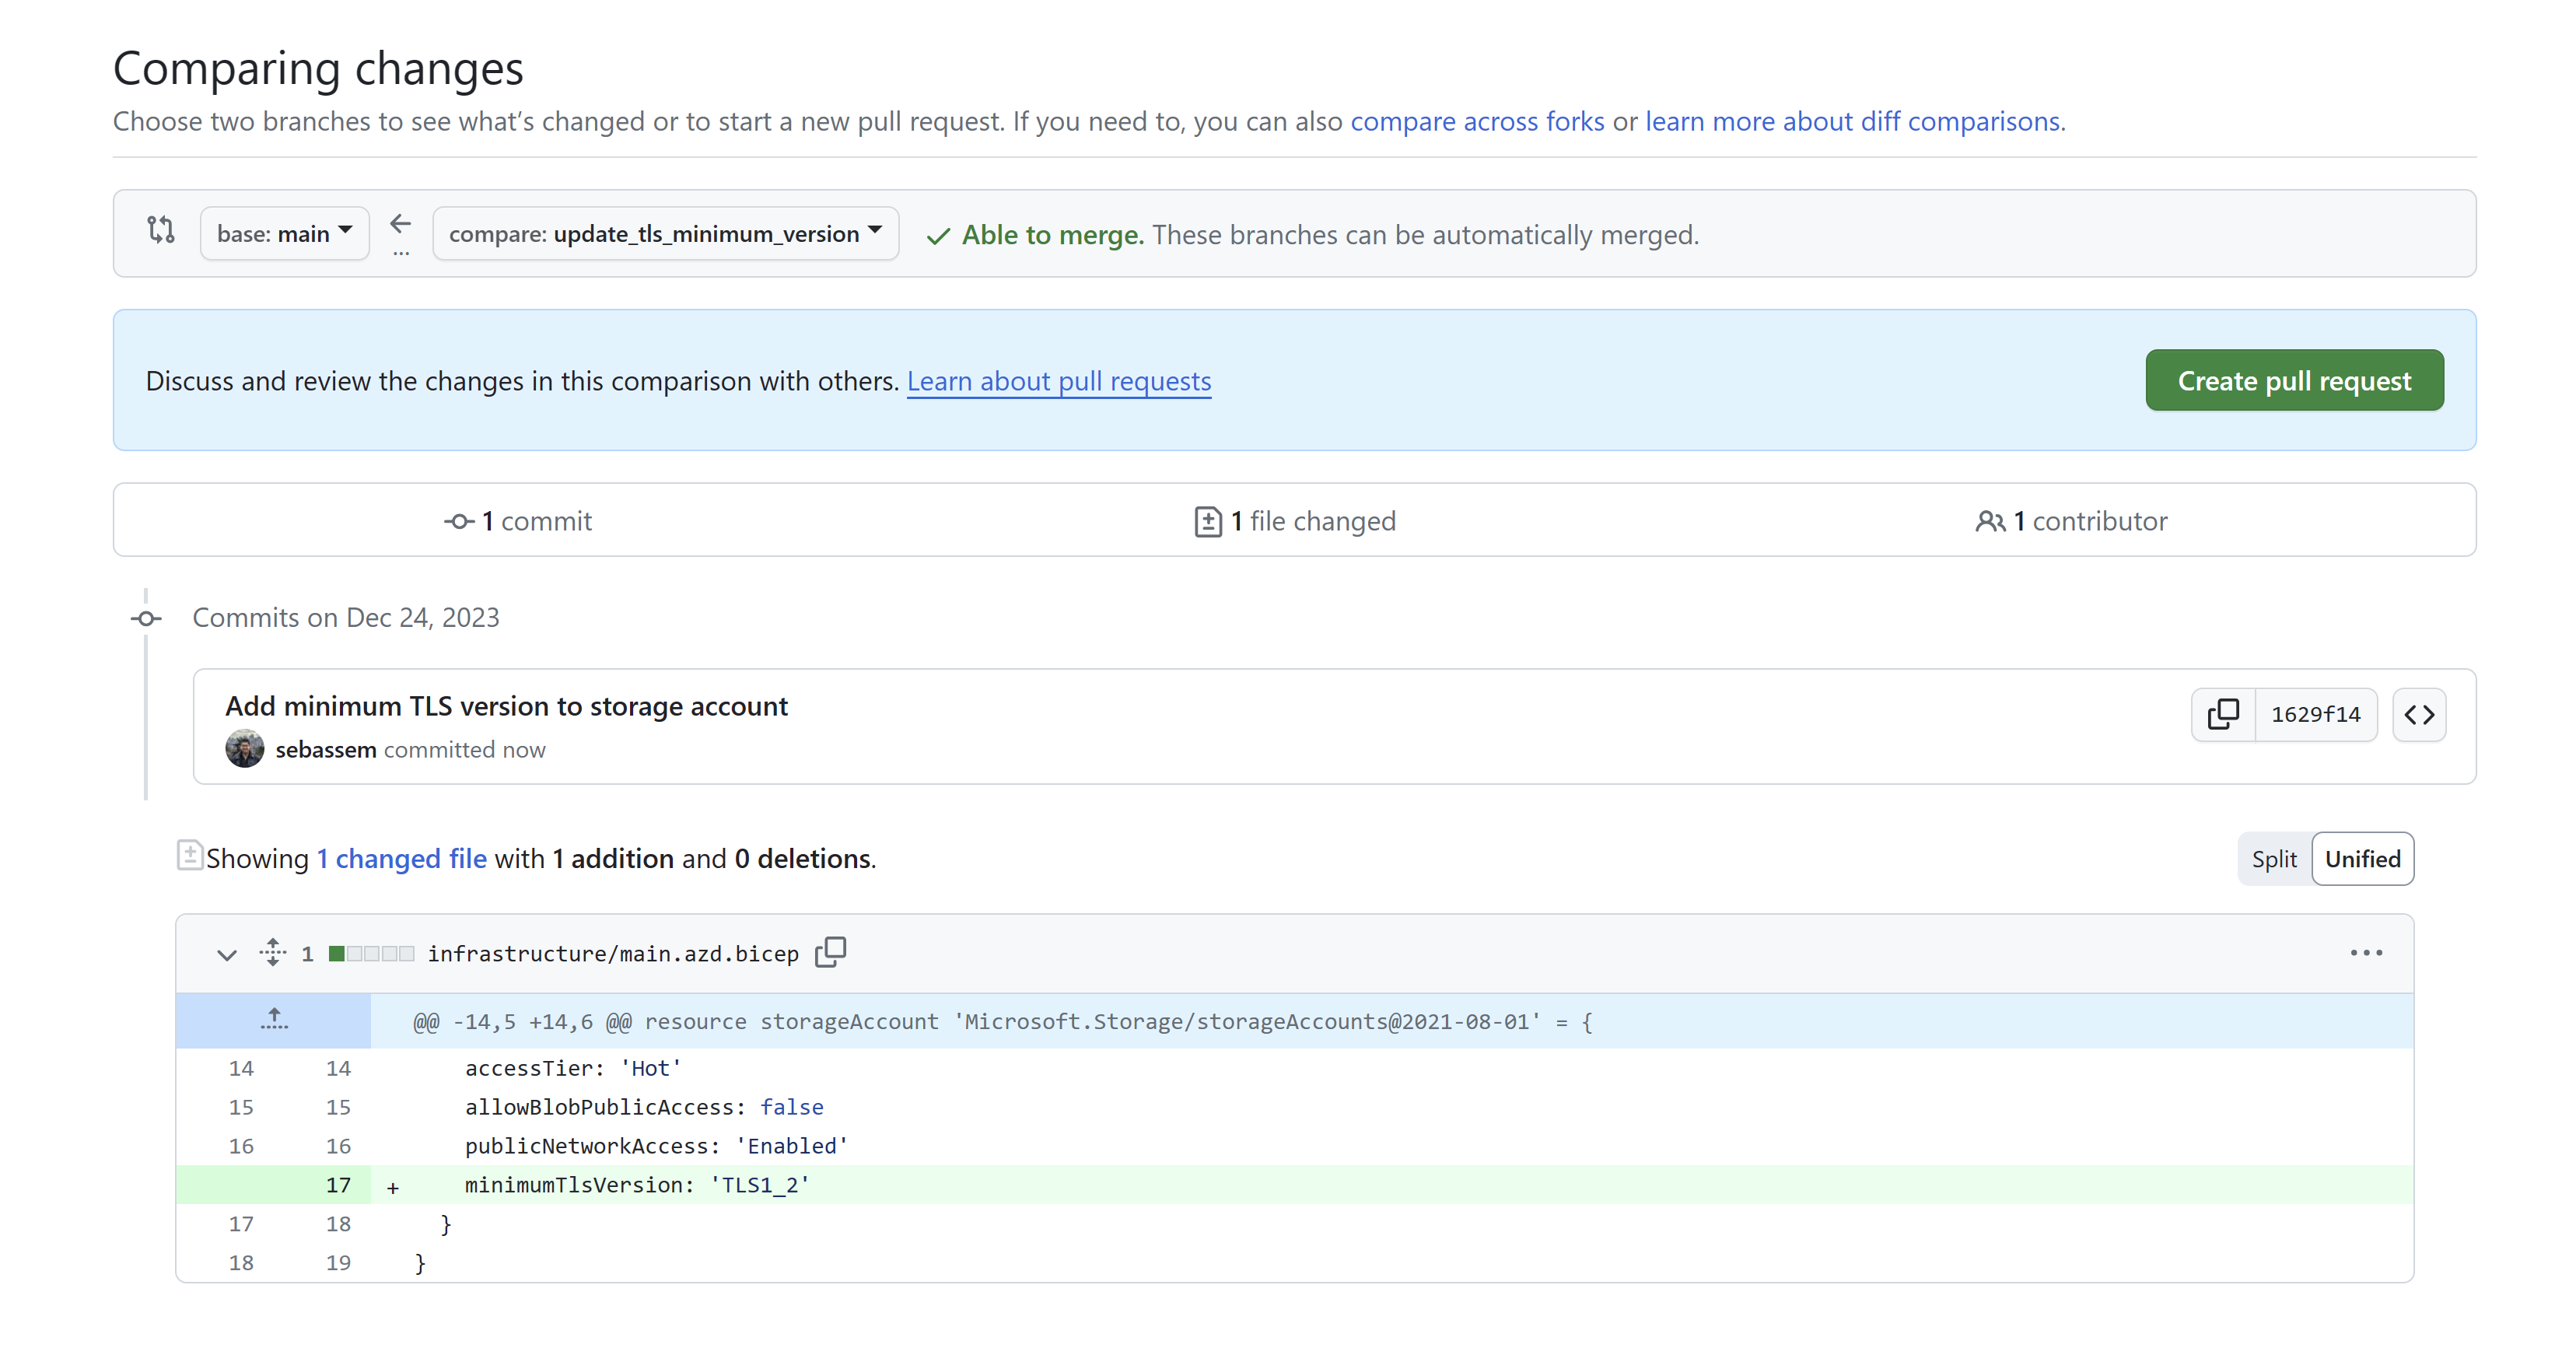 Screenshot showing the changed files in the pull request